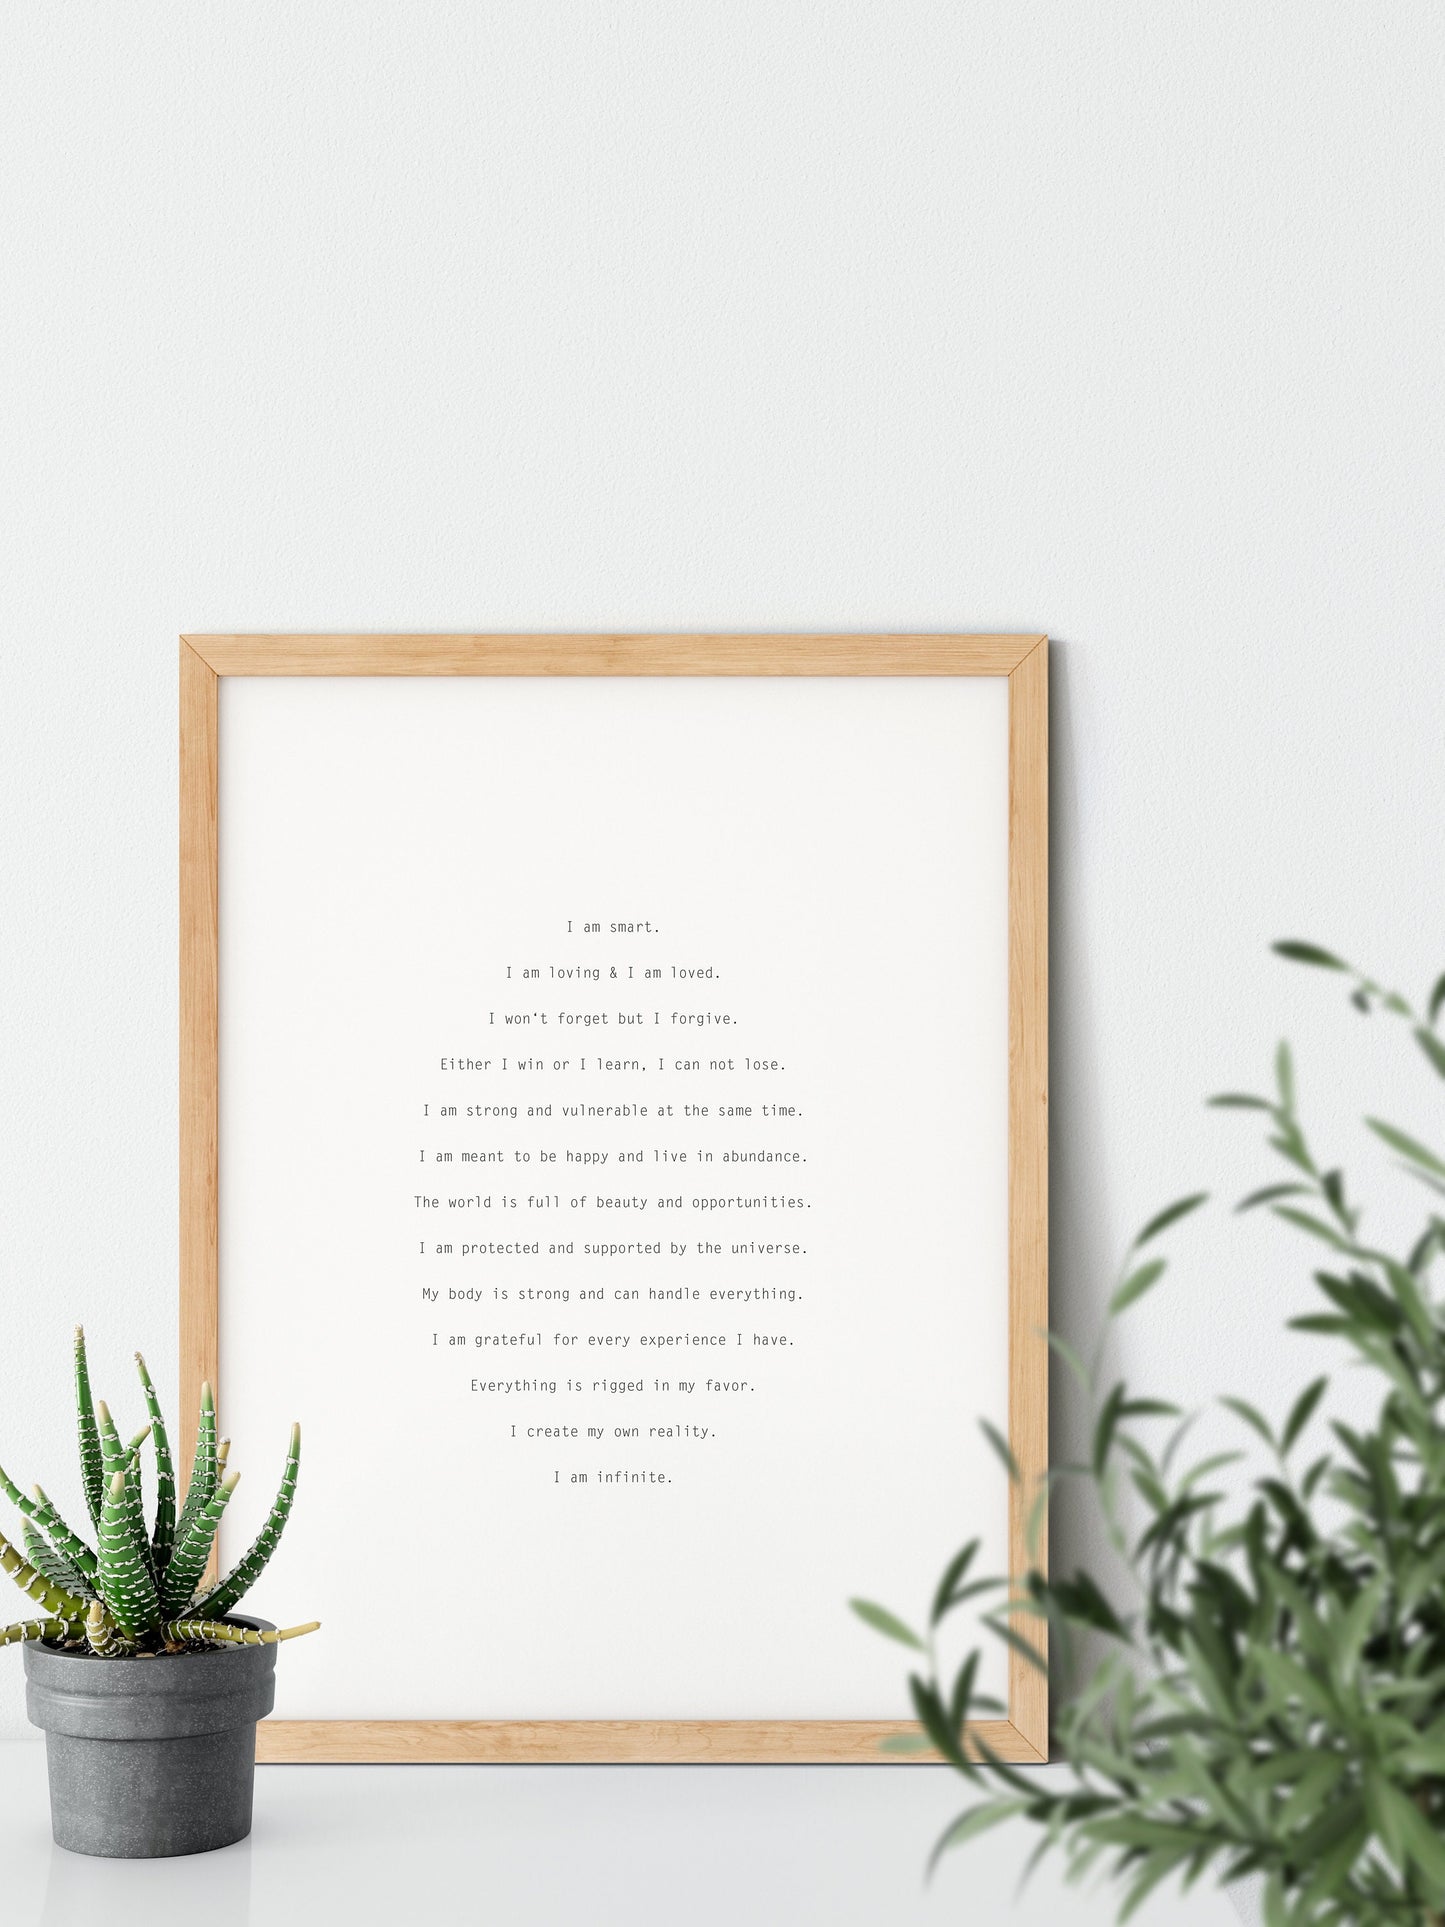 Positive Affirmations Poster, Daily Affirmations, Self Love Affirmations, Typo Poster, Motivational Poster, Minimalist